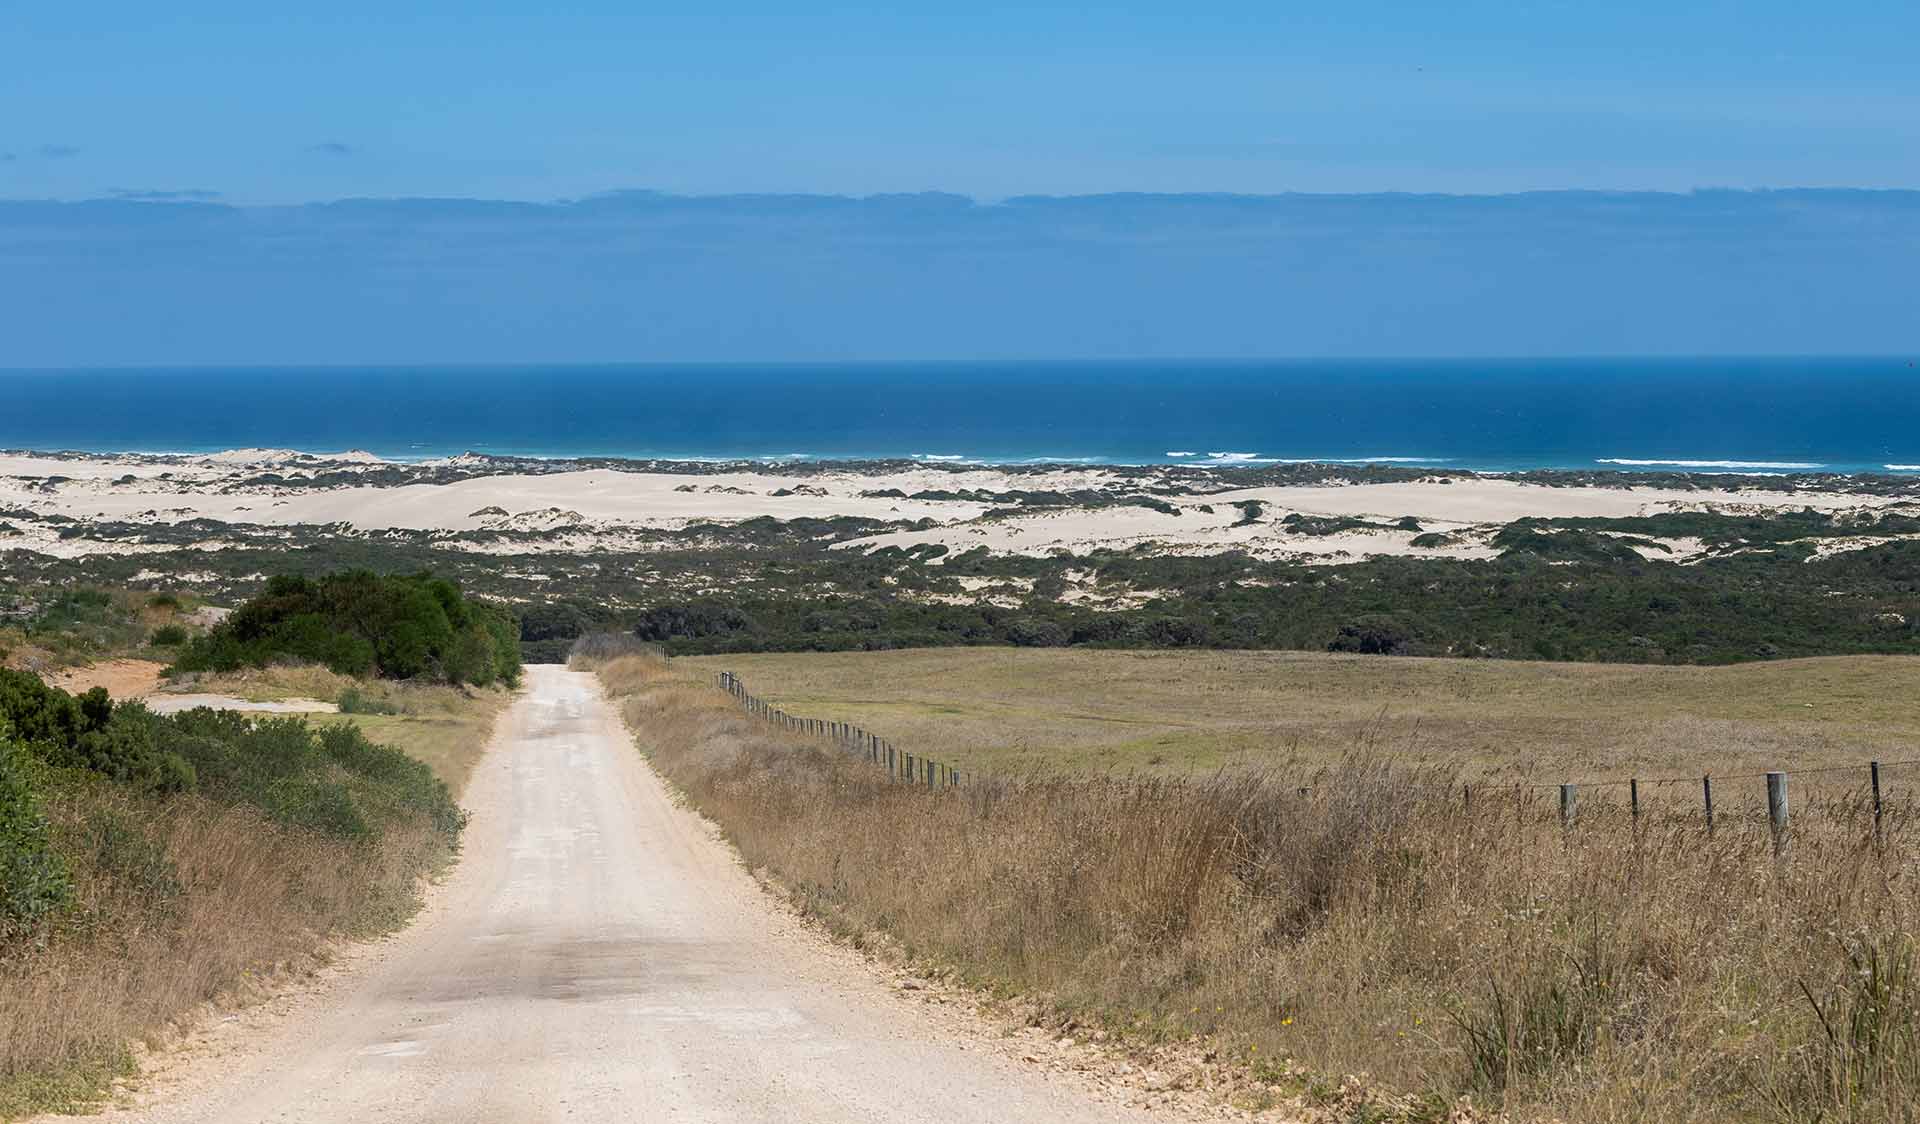 The road leading towards Discovery Bay Coastal Park with sand dunes and then the ocean in the background